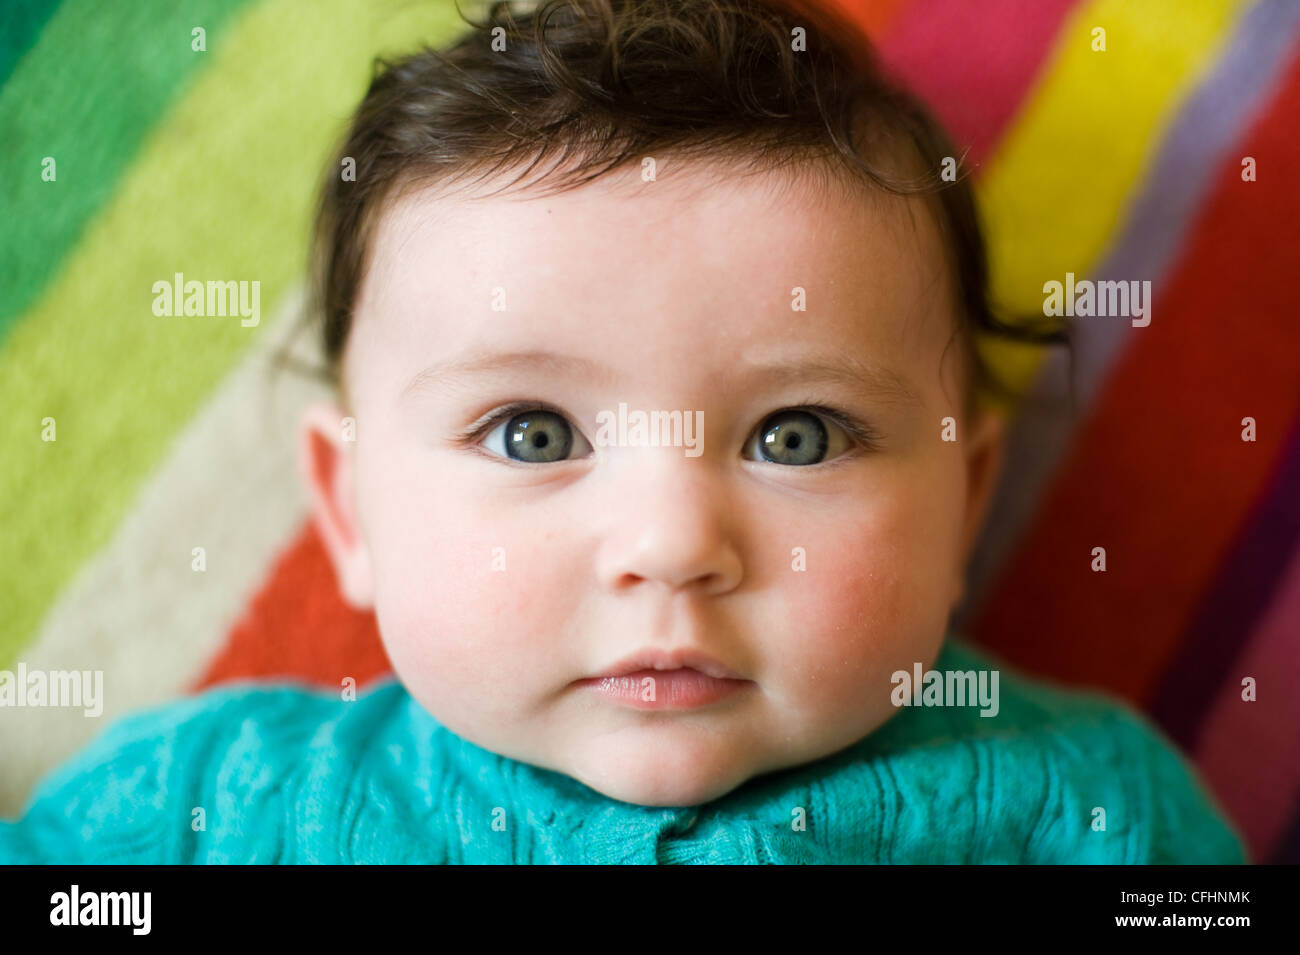 Beautiful Baby Girl with brown hair and blue eyes Stock Photo